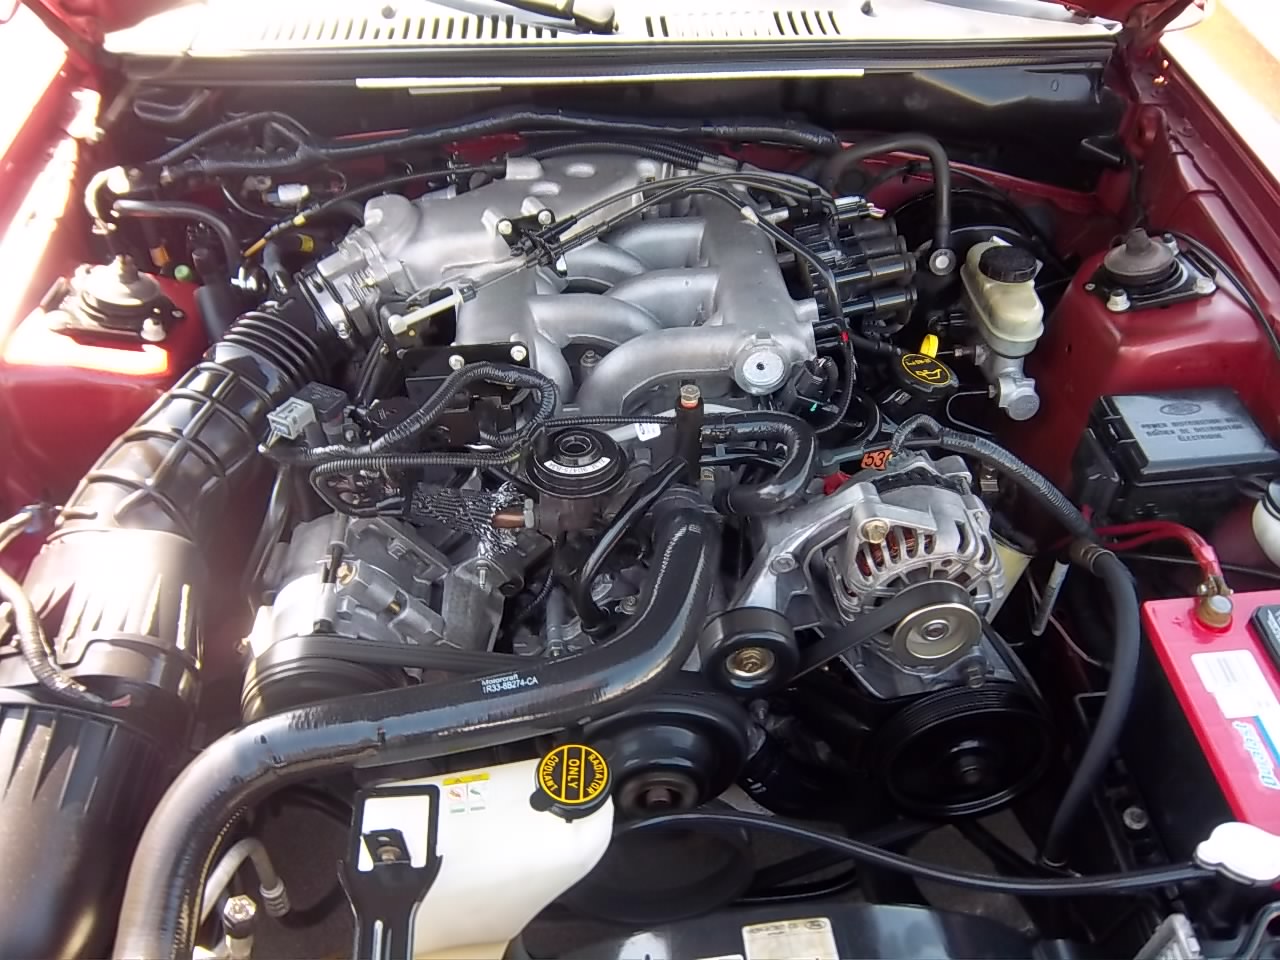 2002 Ford mustang cobra engine specs #2